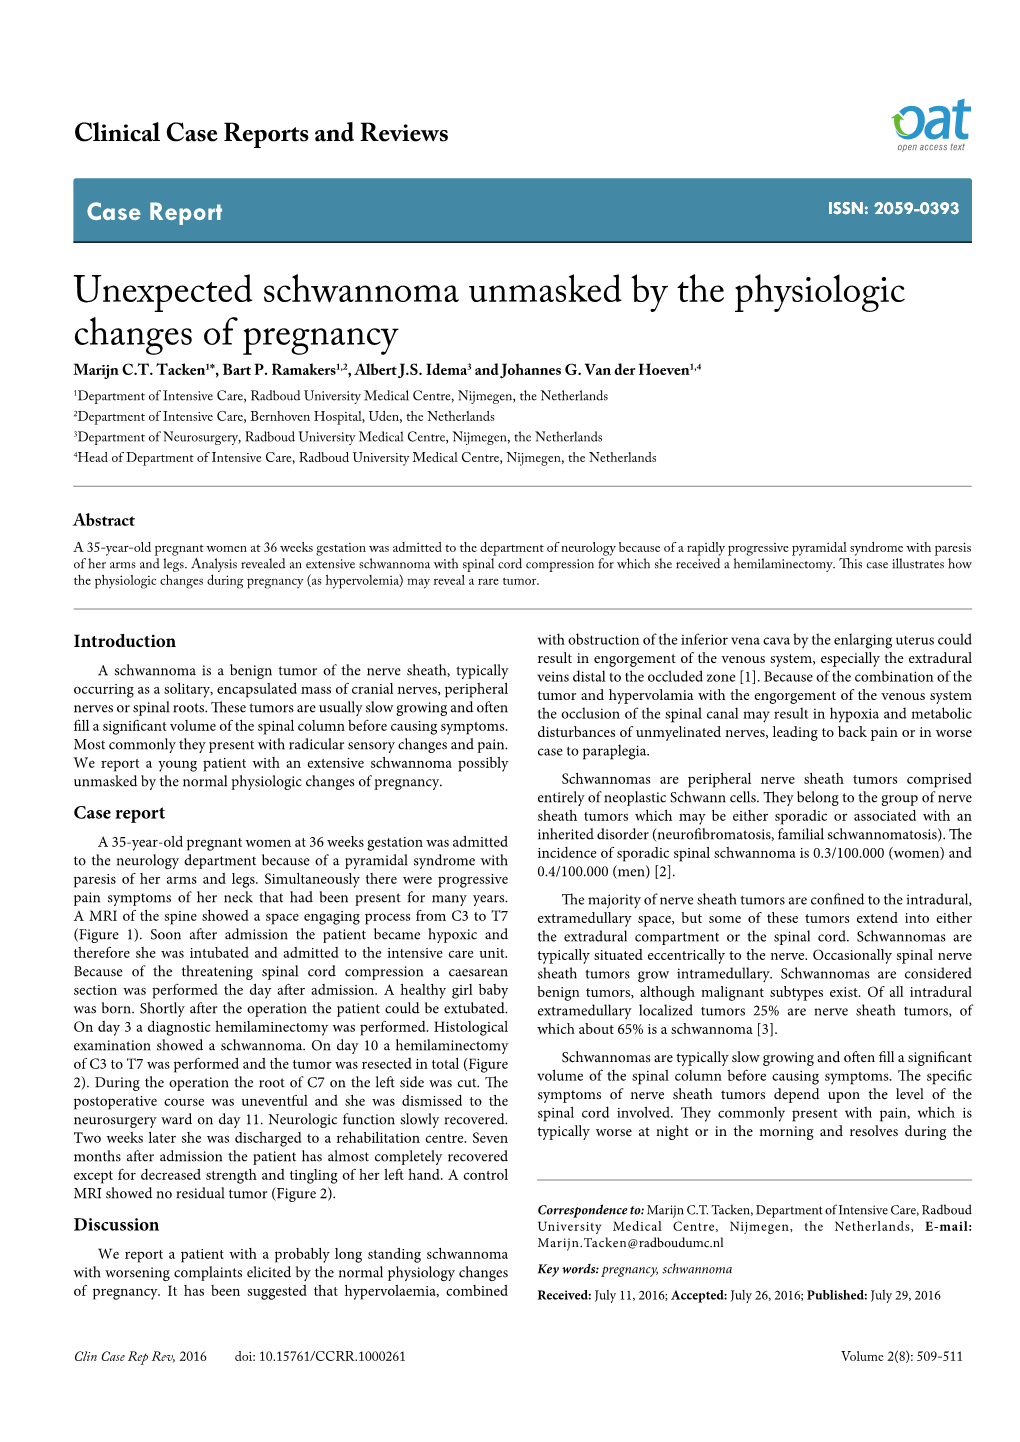 Unexpected Schwannoma Unmasked by the Physiologic Changes of Pregnancy Marijn C.T